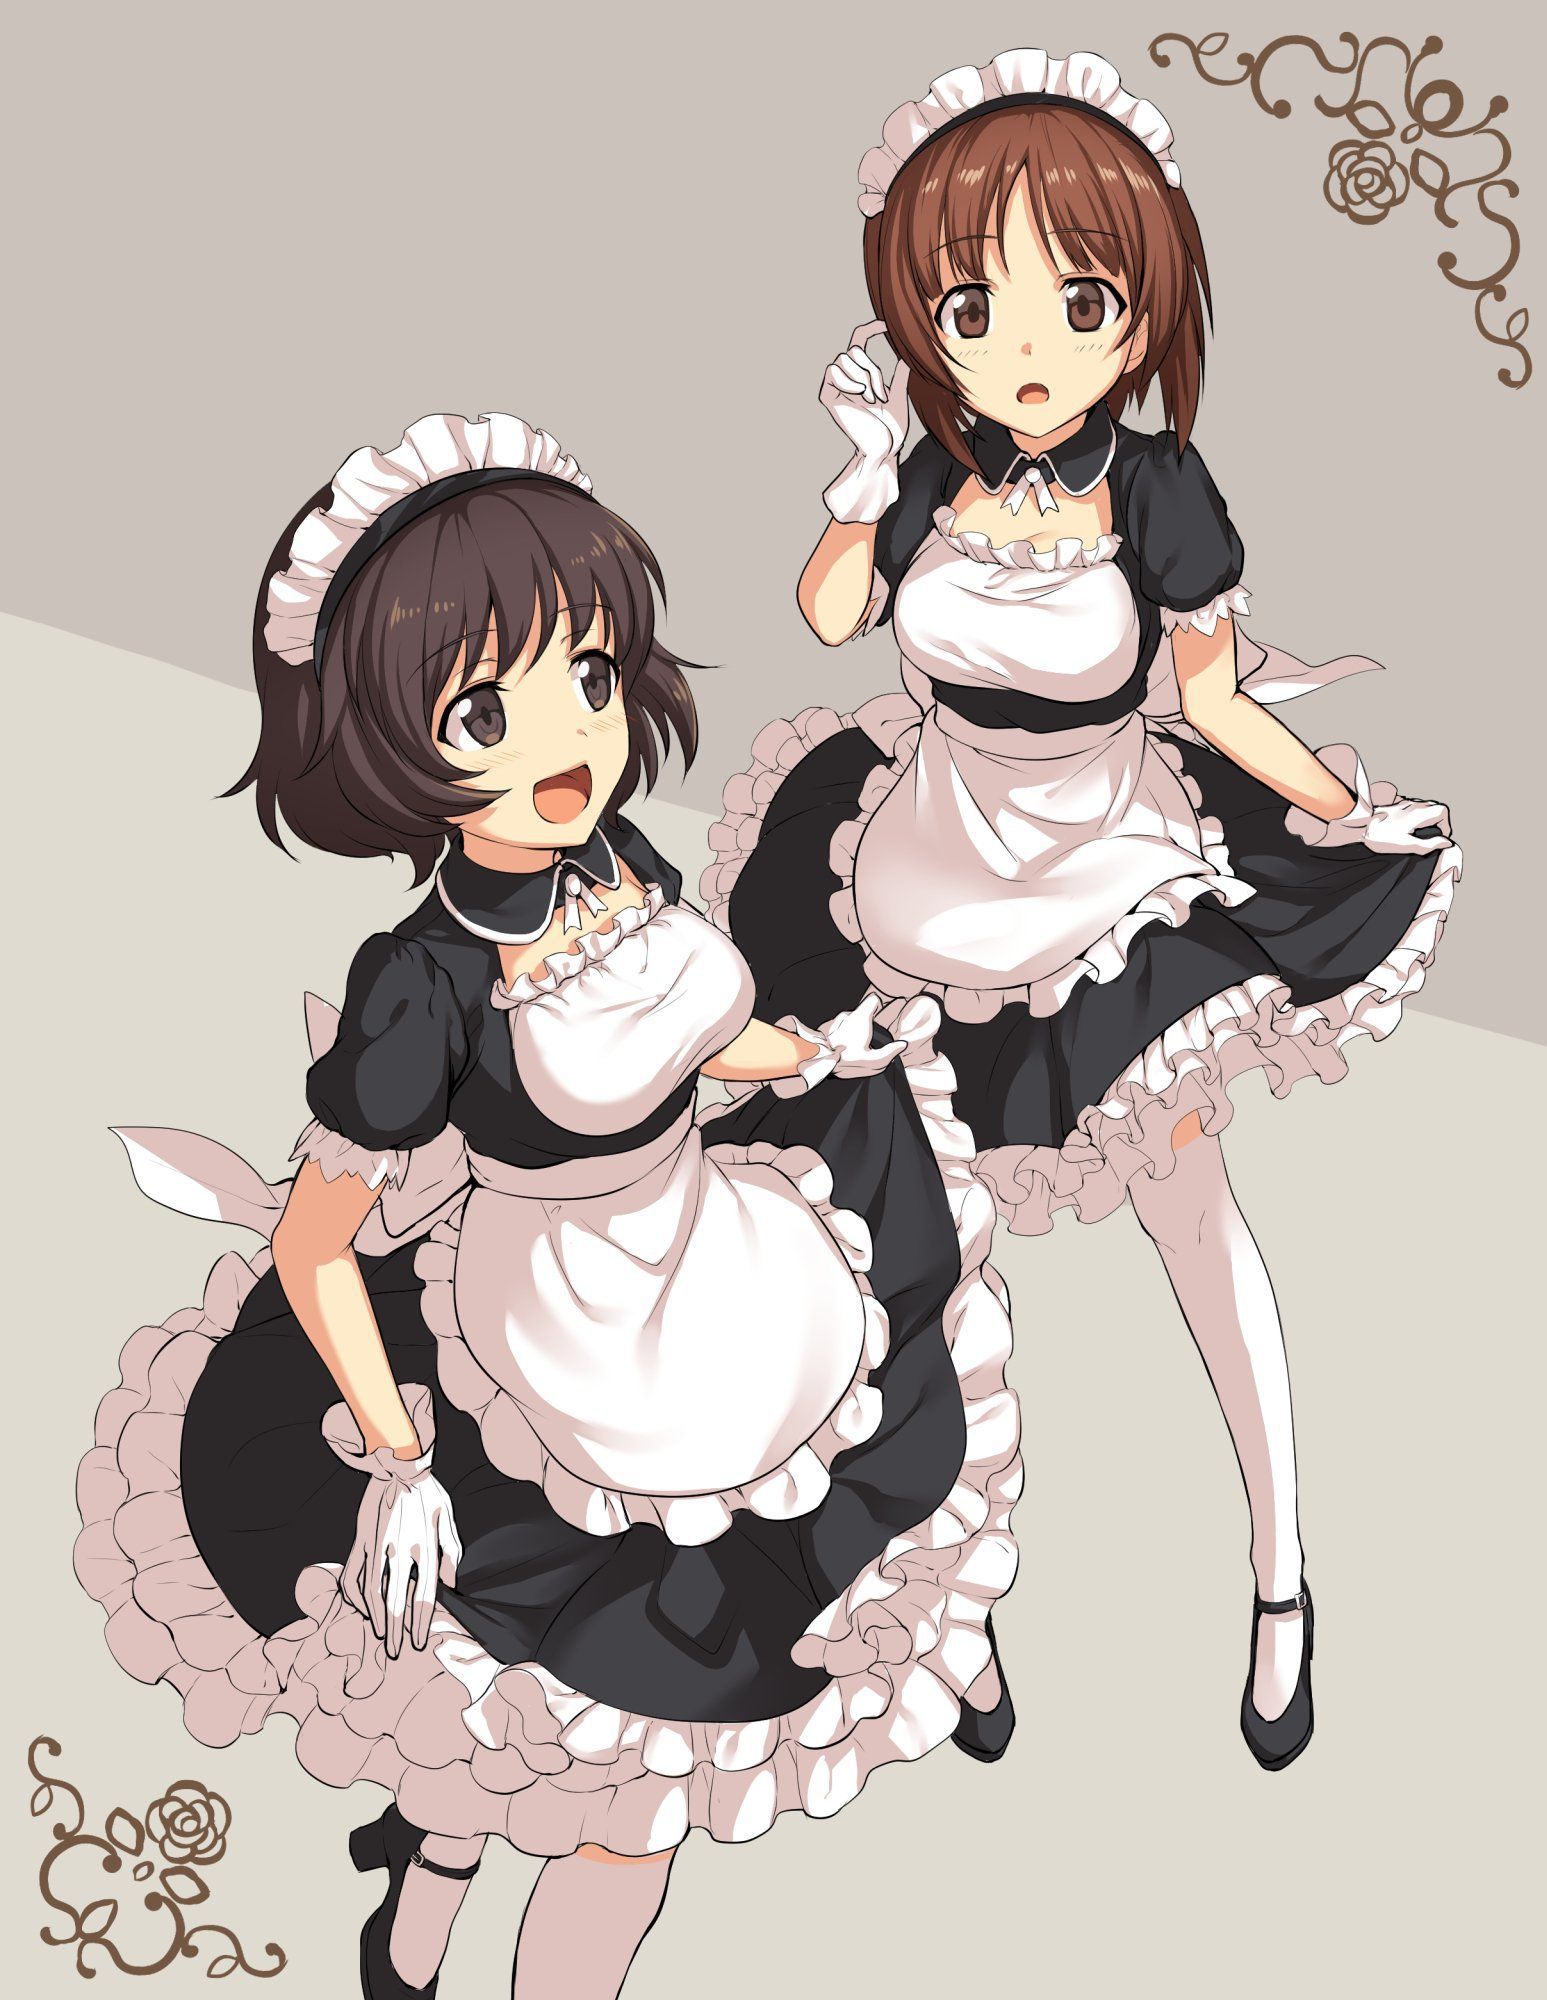 [Secondary ZIP] The second image of the maid wants you to serve naughty Girl 19